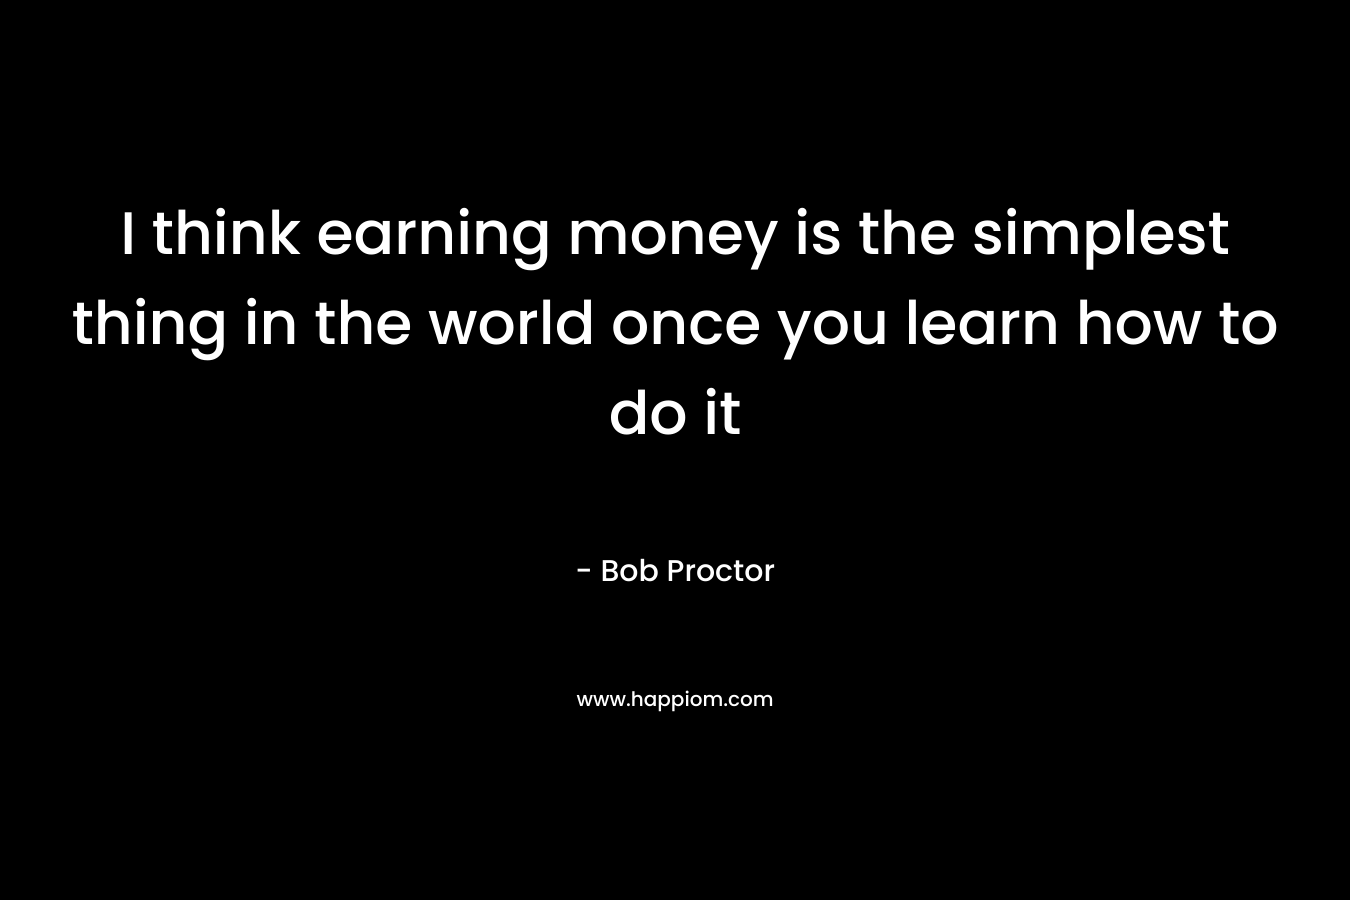 I think earning money is the simplest thing in the world once you learn how to do it